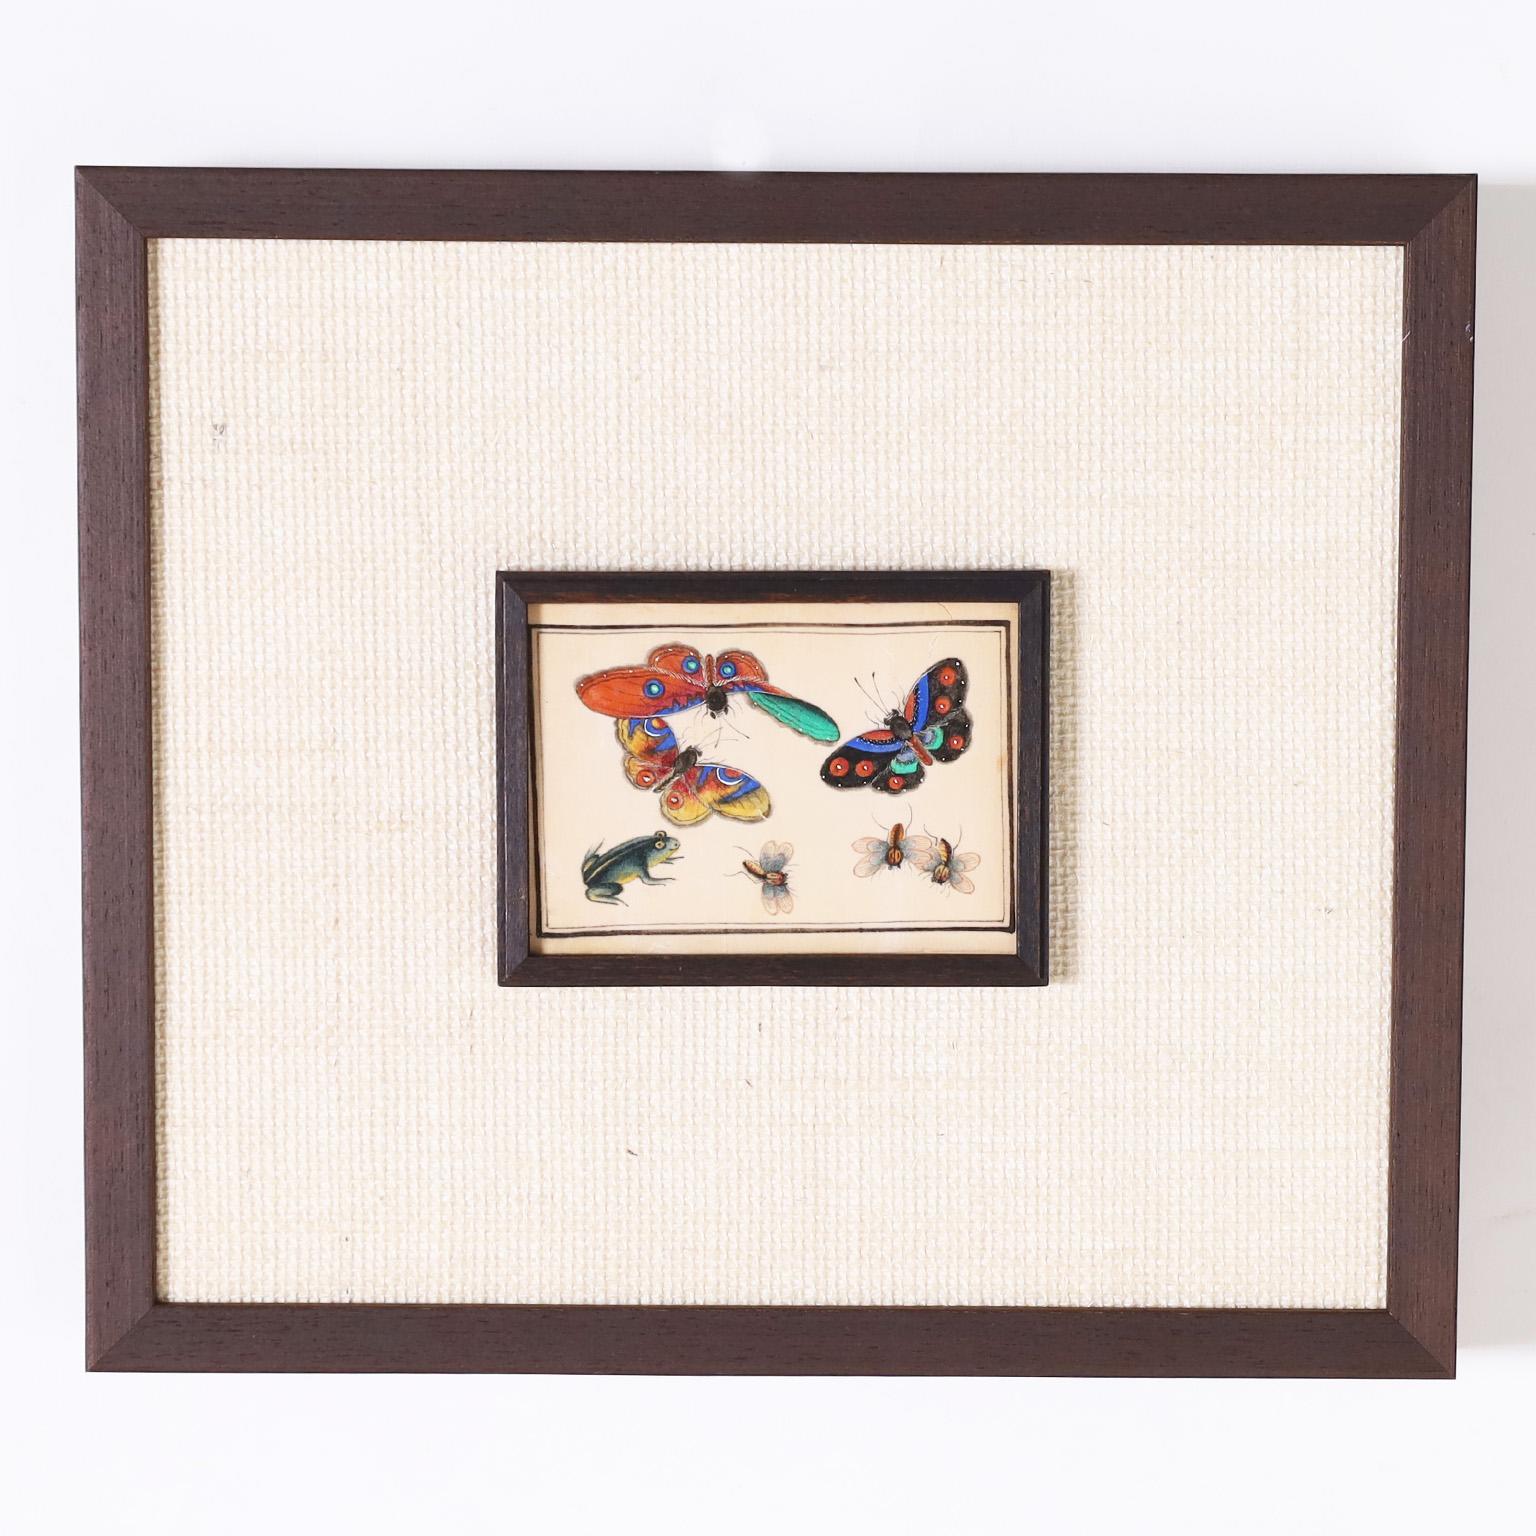 Rare and remarkable set of twelve 19th century Chinese watercolors on pith paper depicting moth species and assorted other insects, executed in glorious vivid colors. Presented under glass in a frame within a frame.